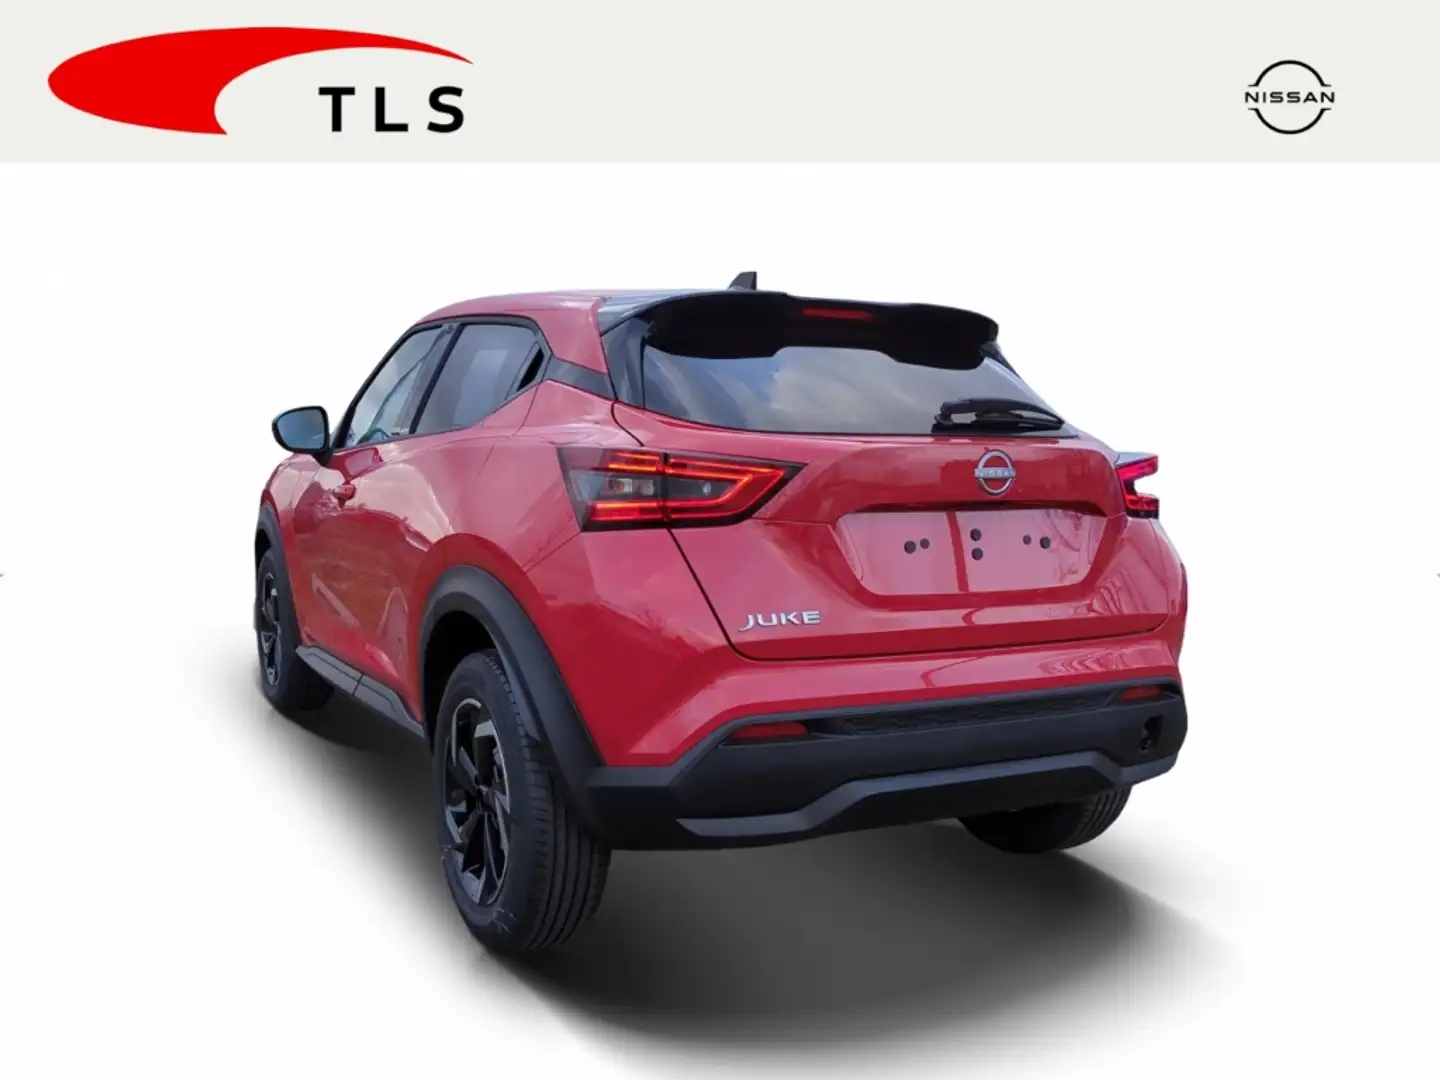 Nissan Juke N-STYLE - 1.0 DIG-T - 114PS - SOLID RED Red - 2